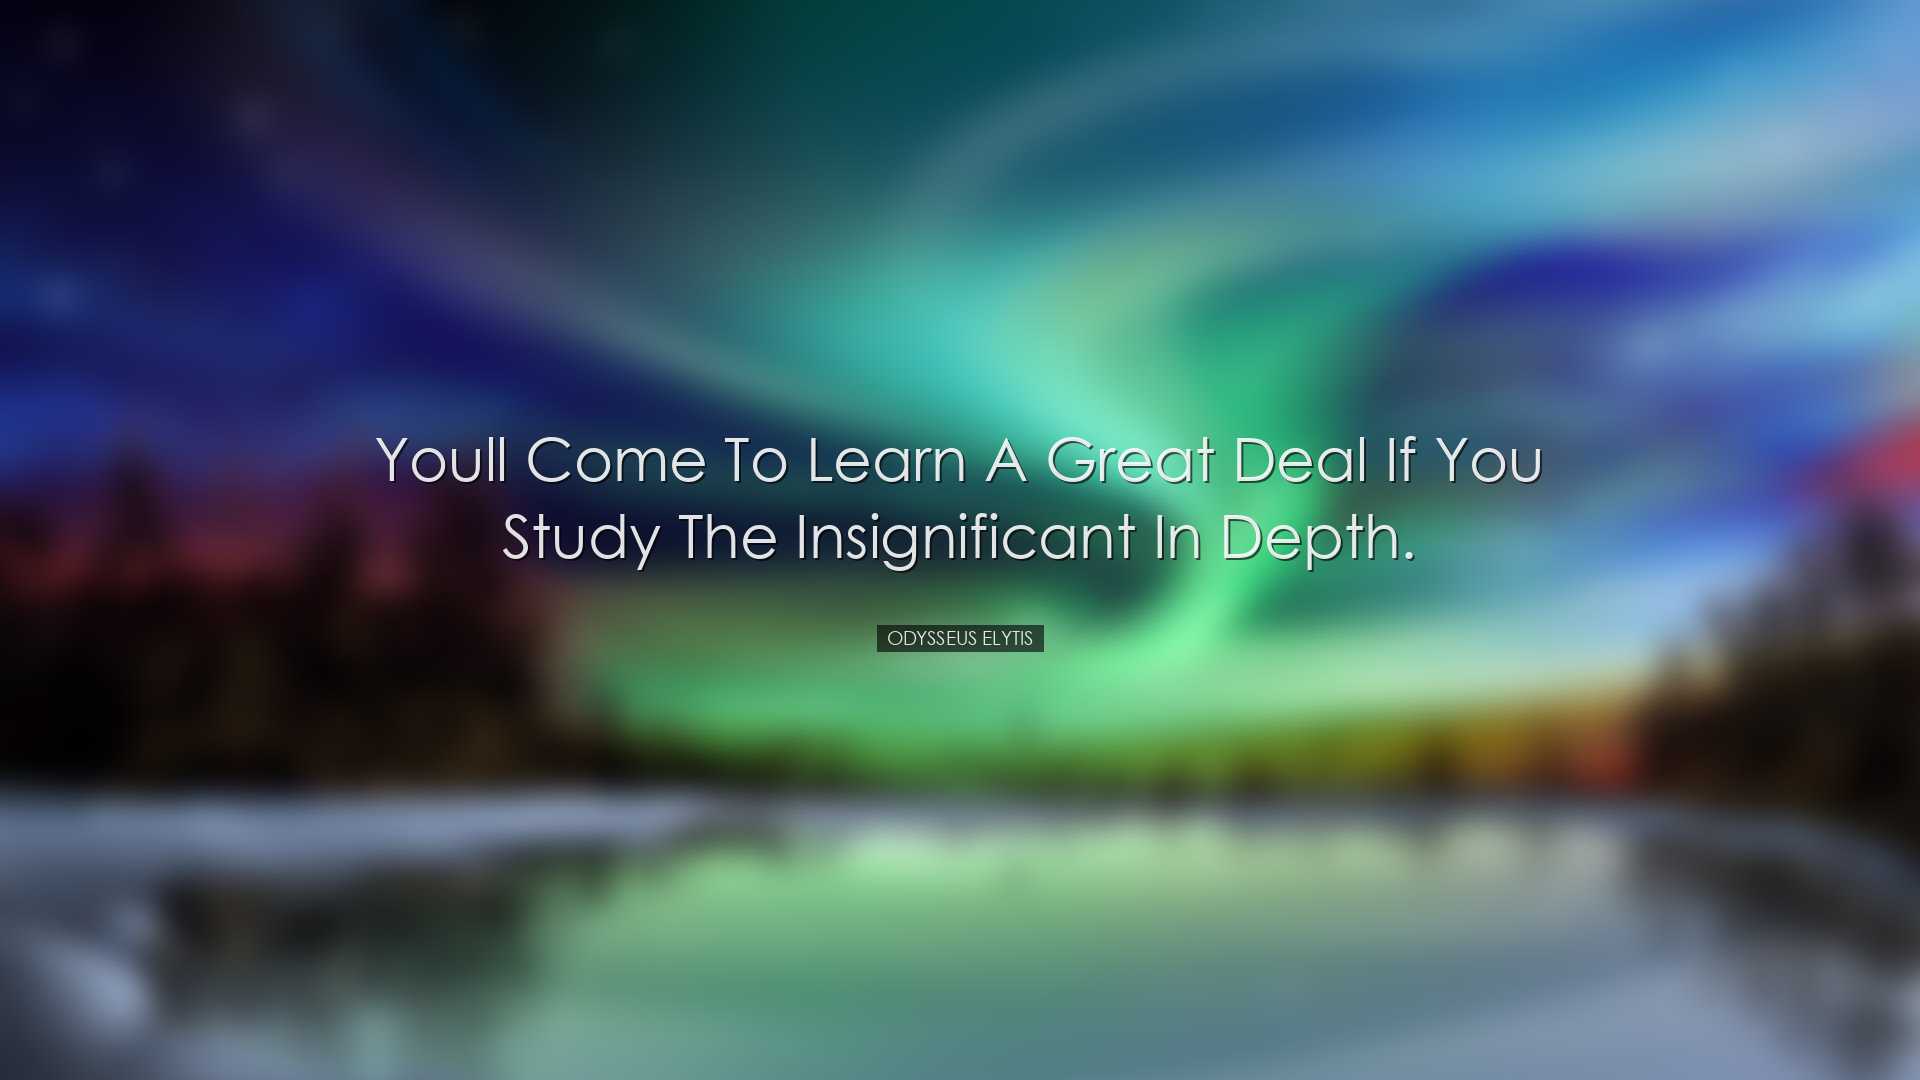 Youll come to learn a great deal if you study the Insignificant in